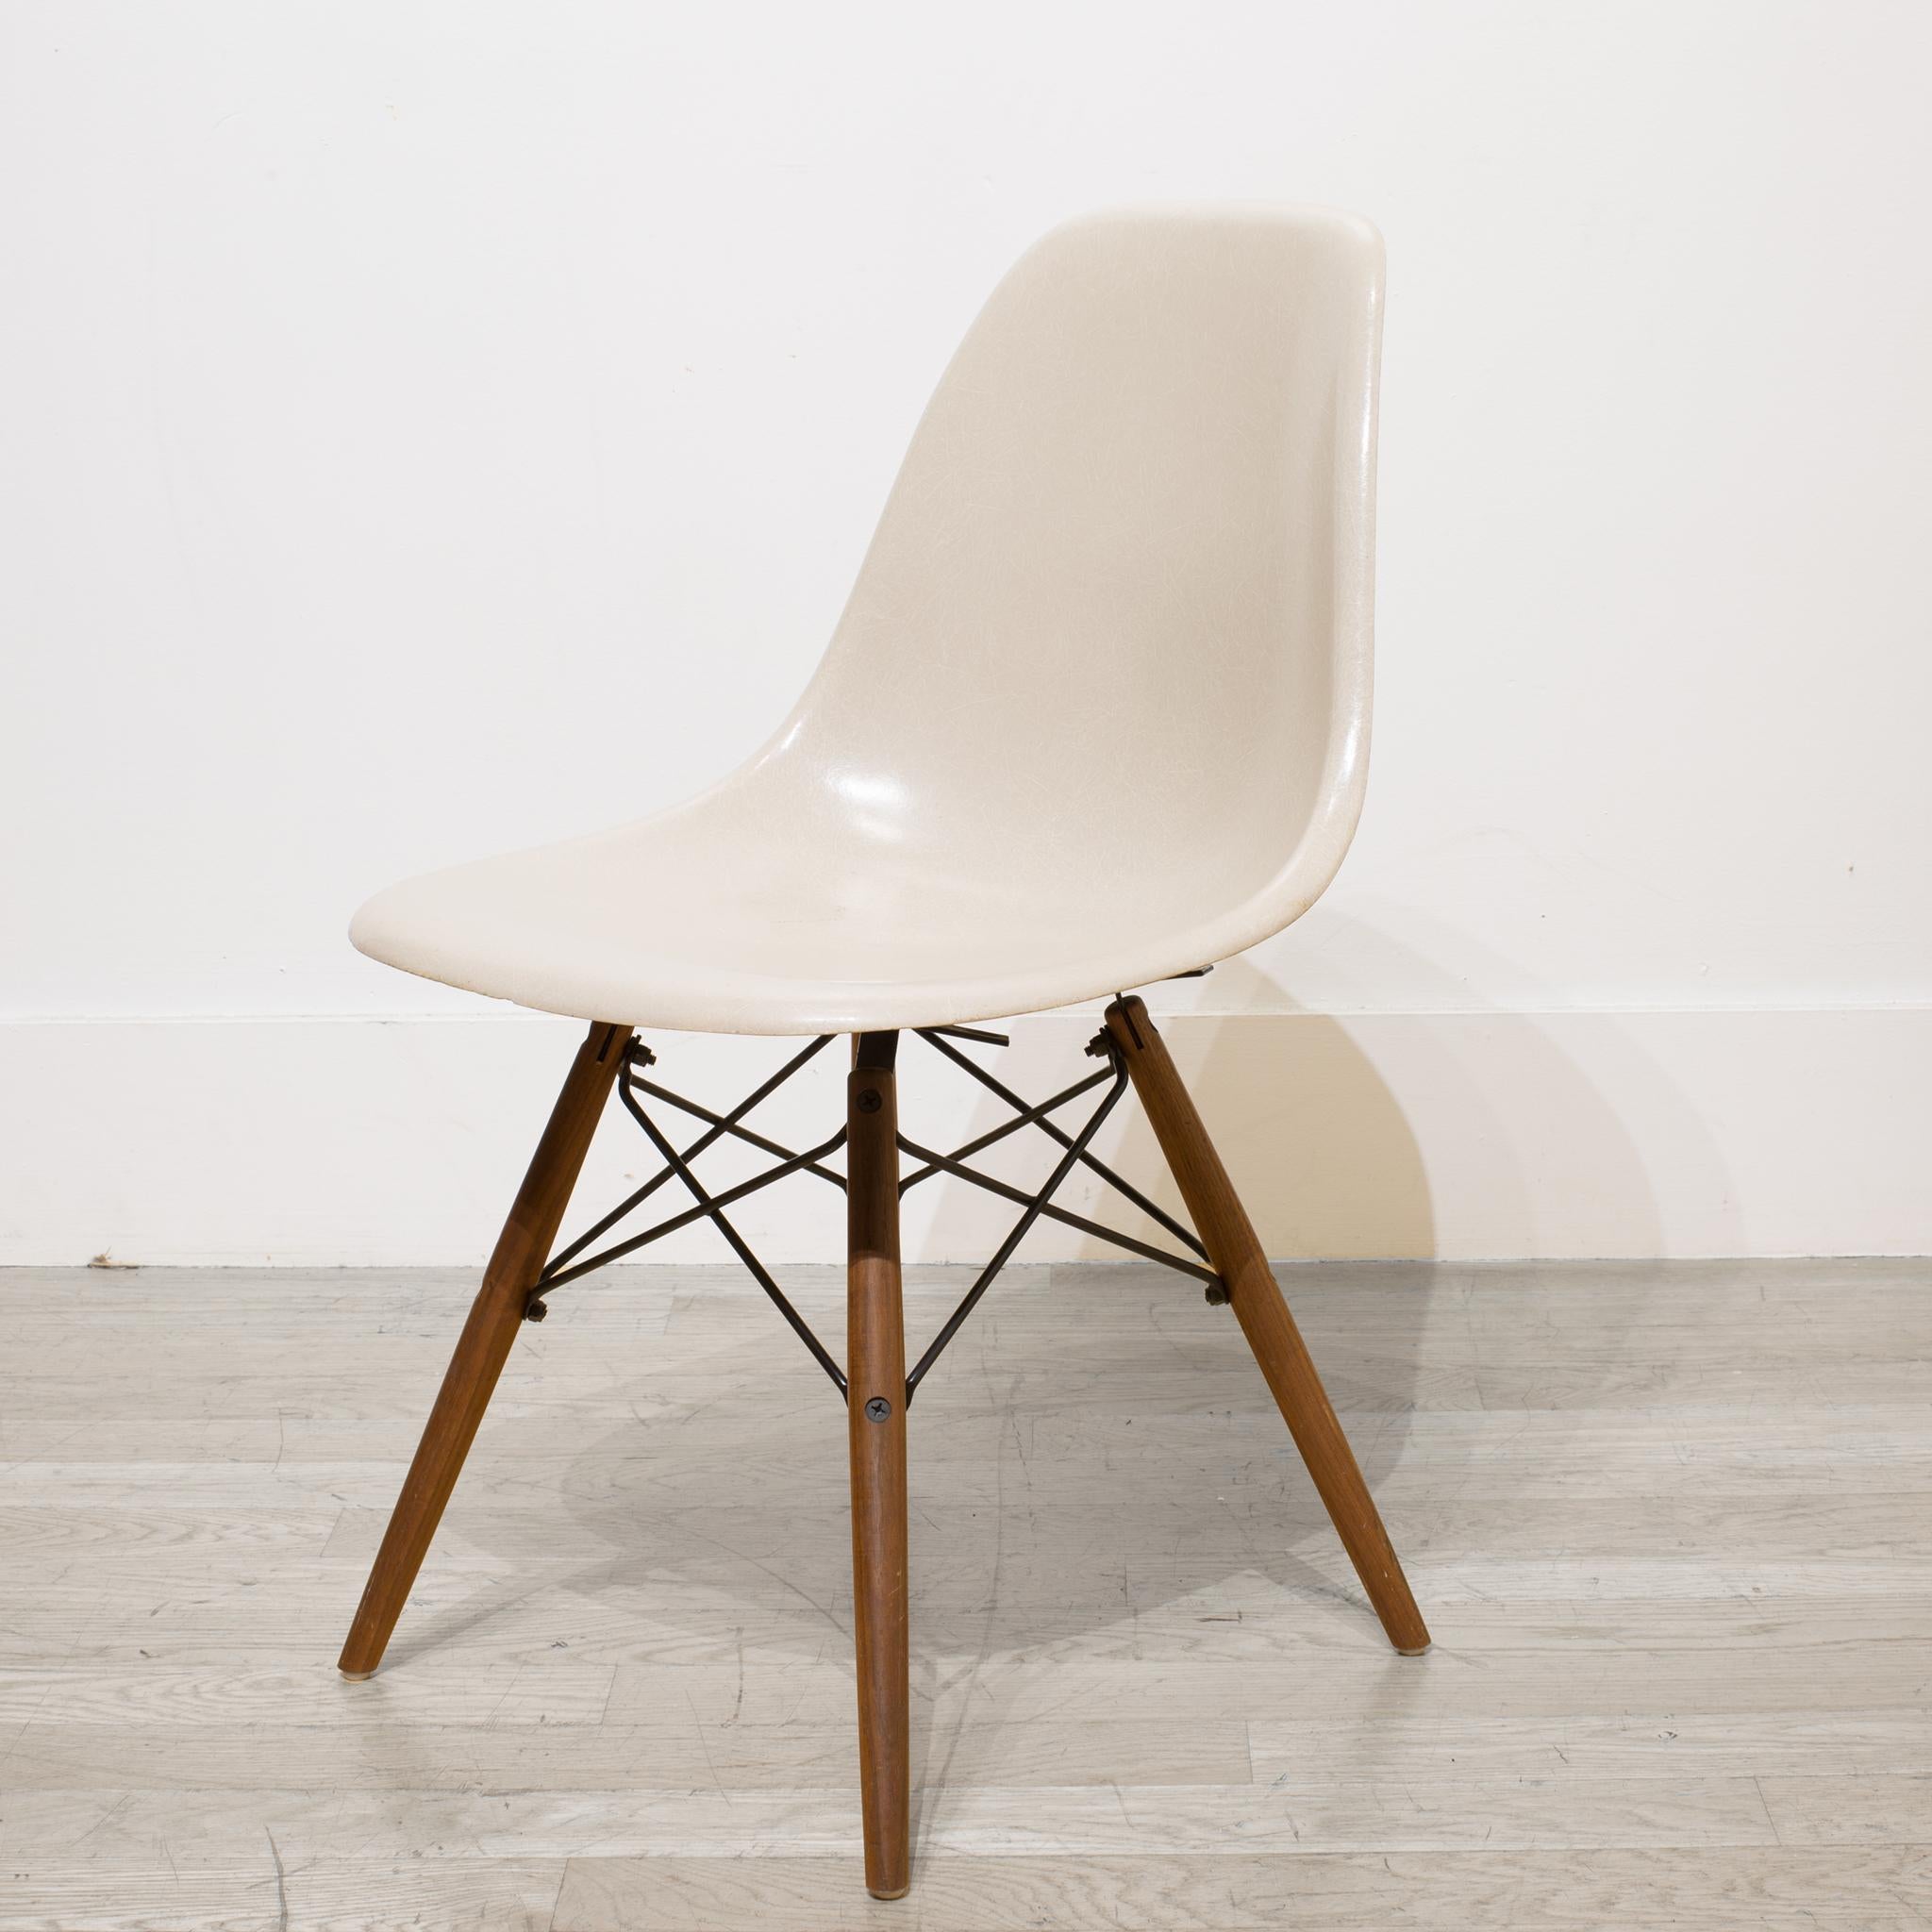 About

This is an original 1950s Eames fiberglass shell chair with original model sticker in light grey. Stamped with the 